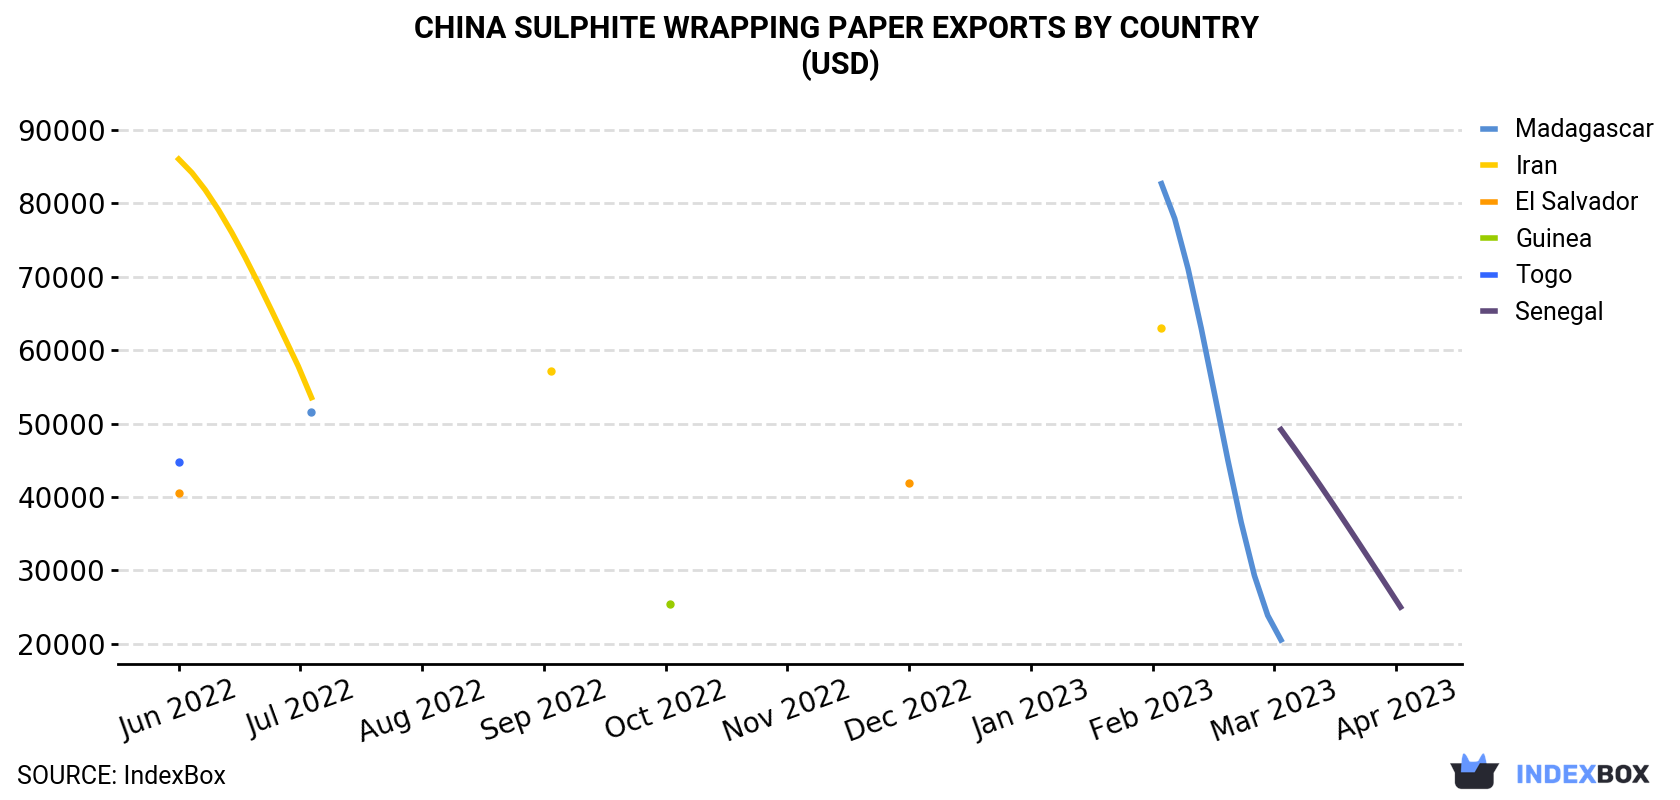 China Sulphite Wrapping Paper Exports By Country (USD)